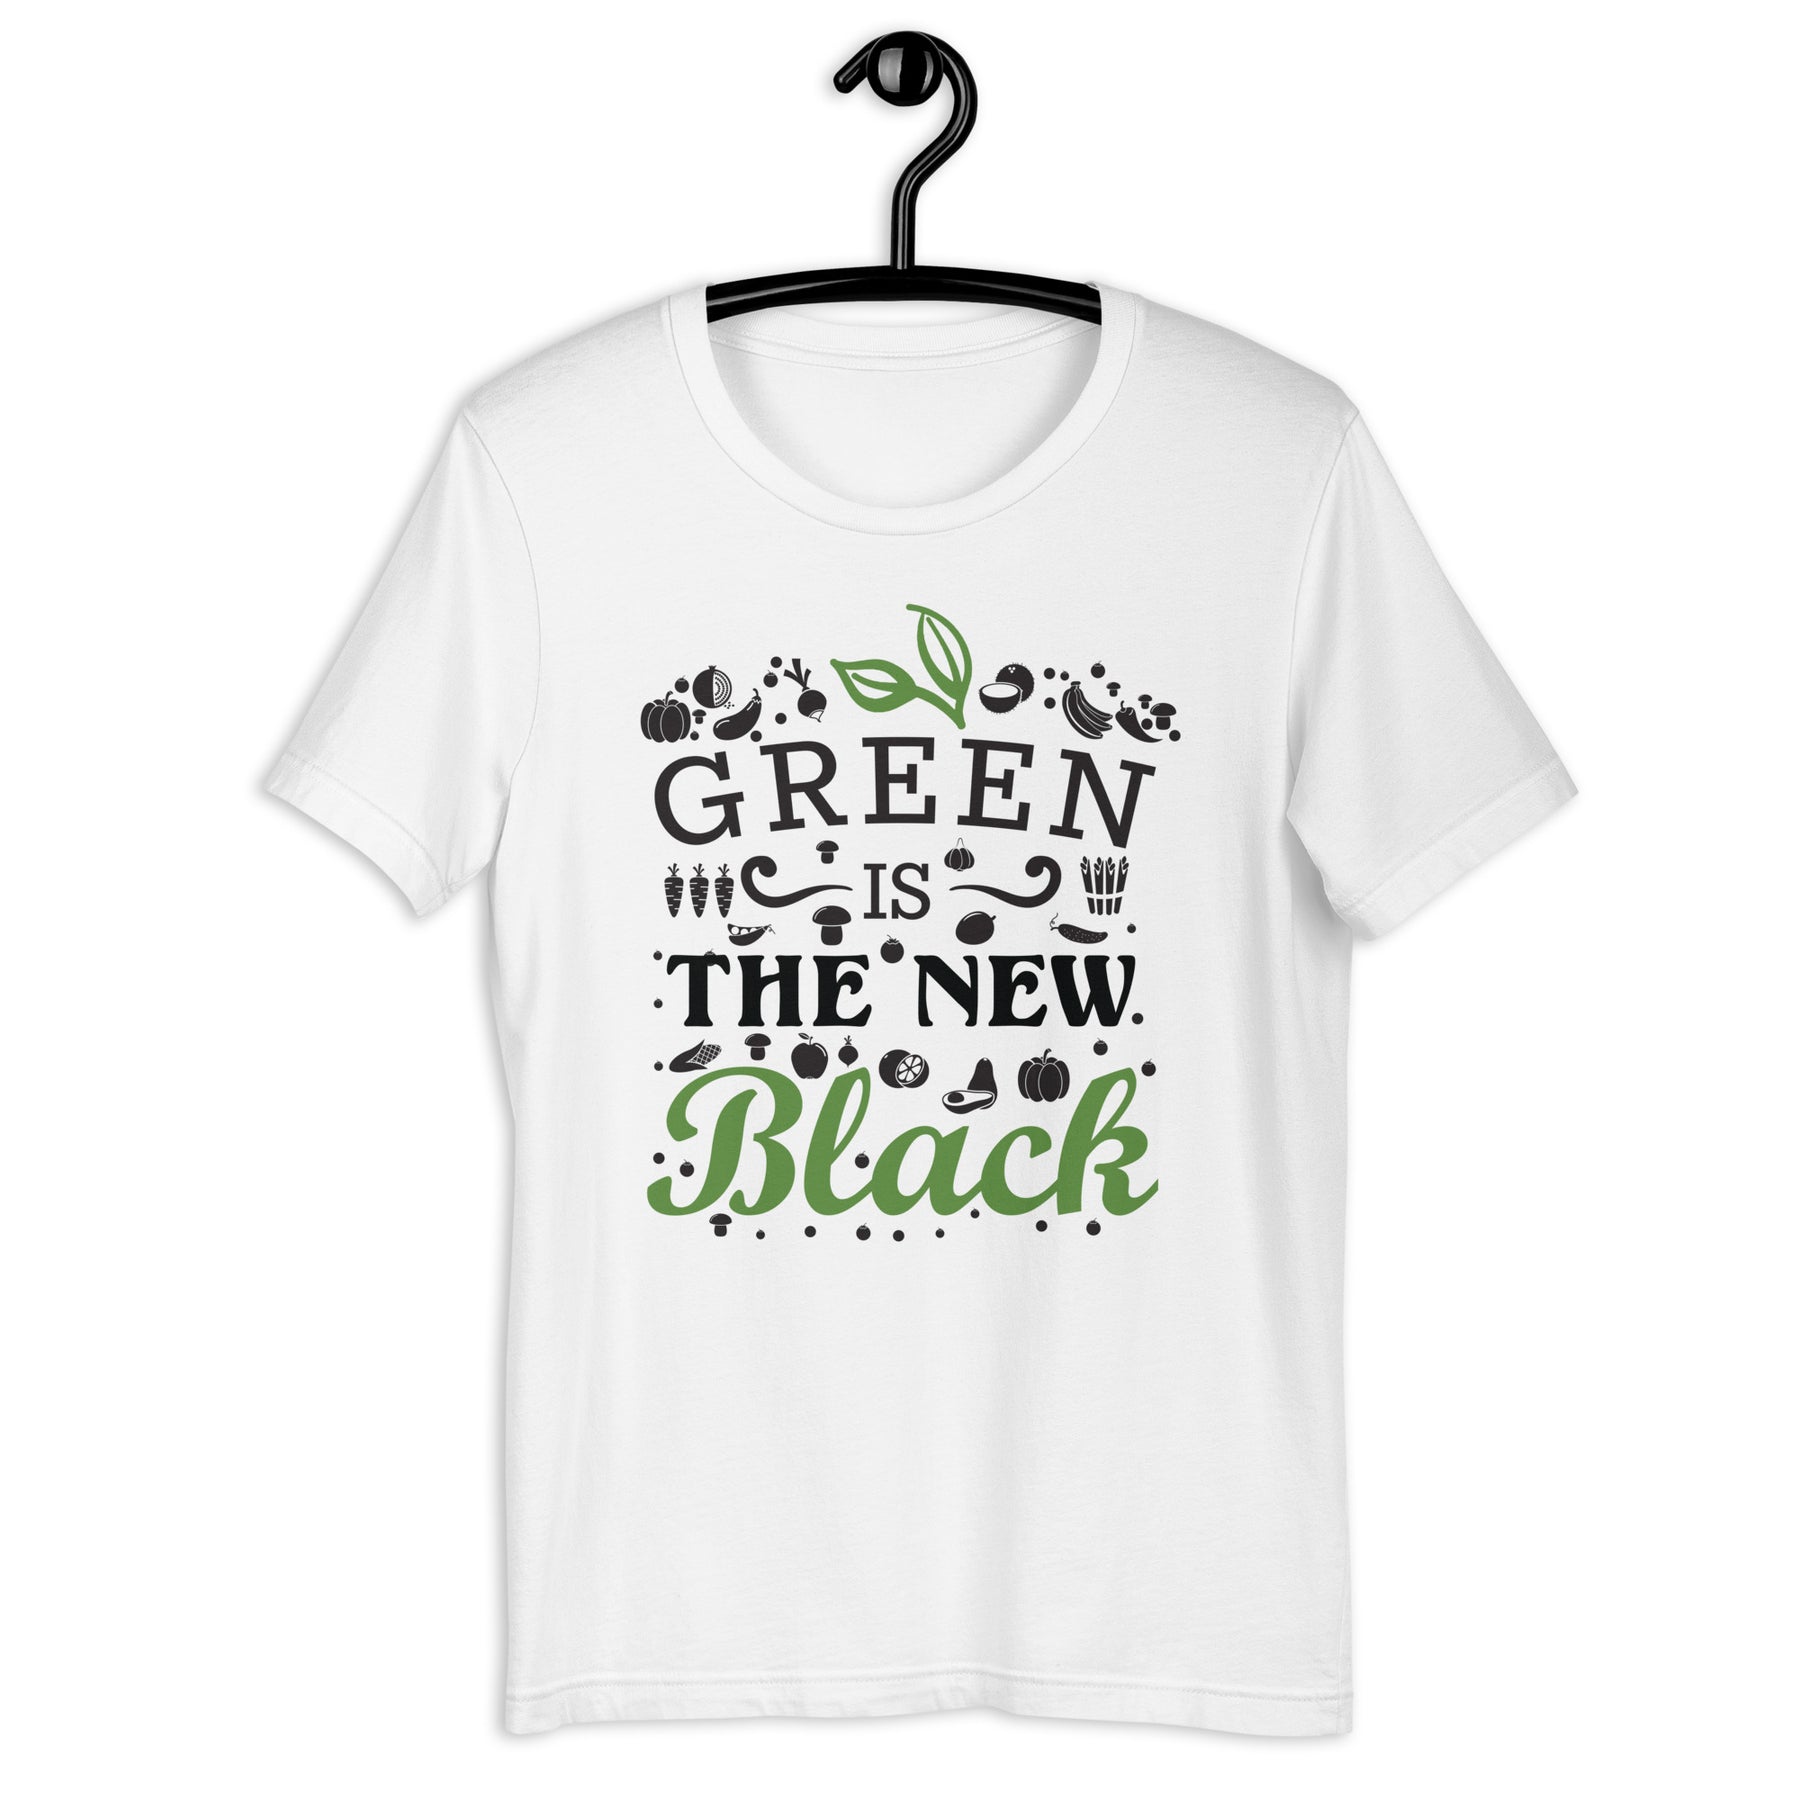 GREEN IS THE NEW BLACK t-shirt